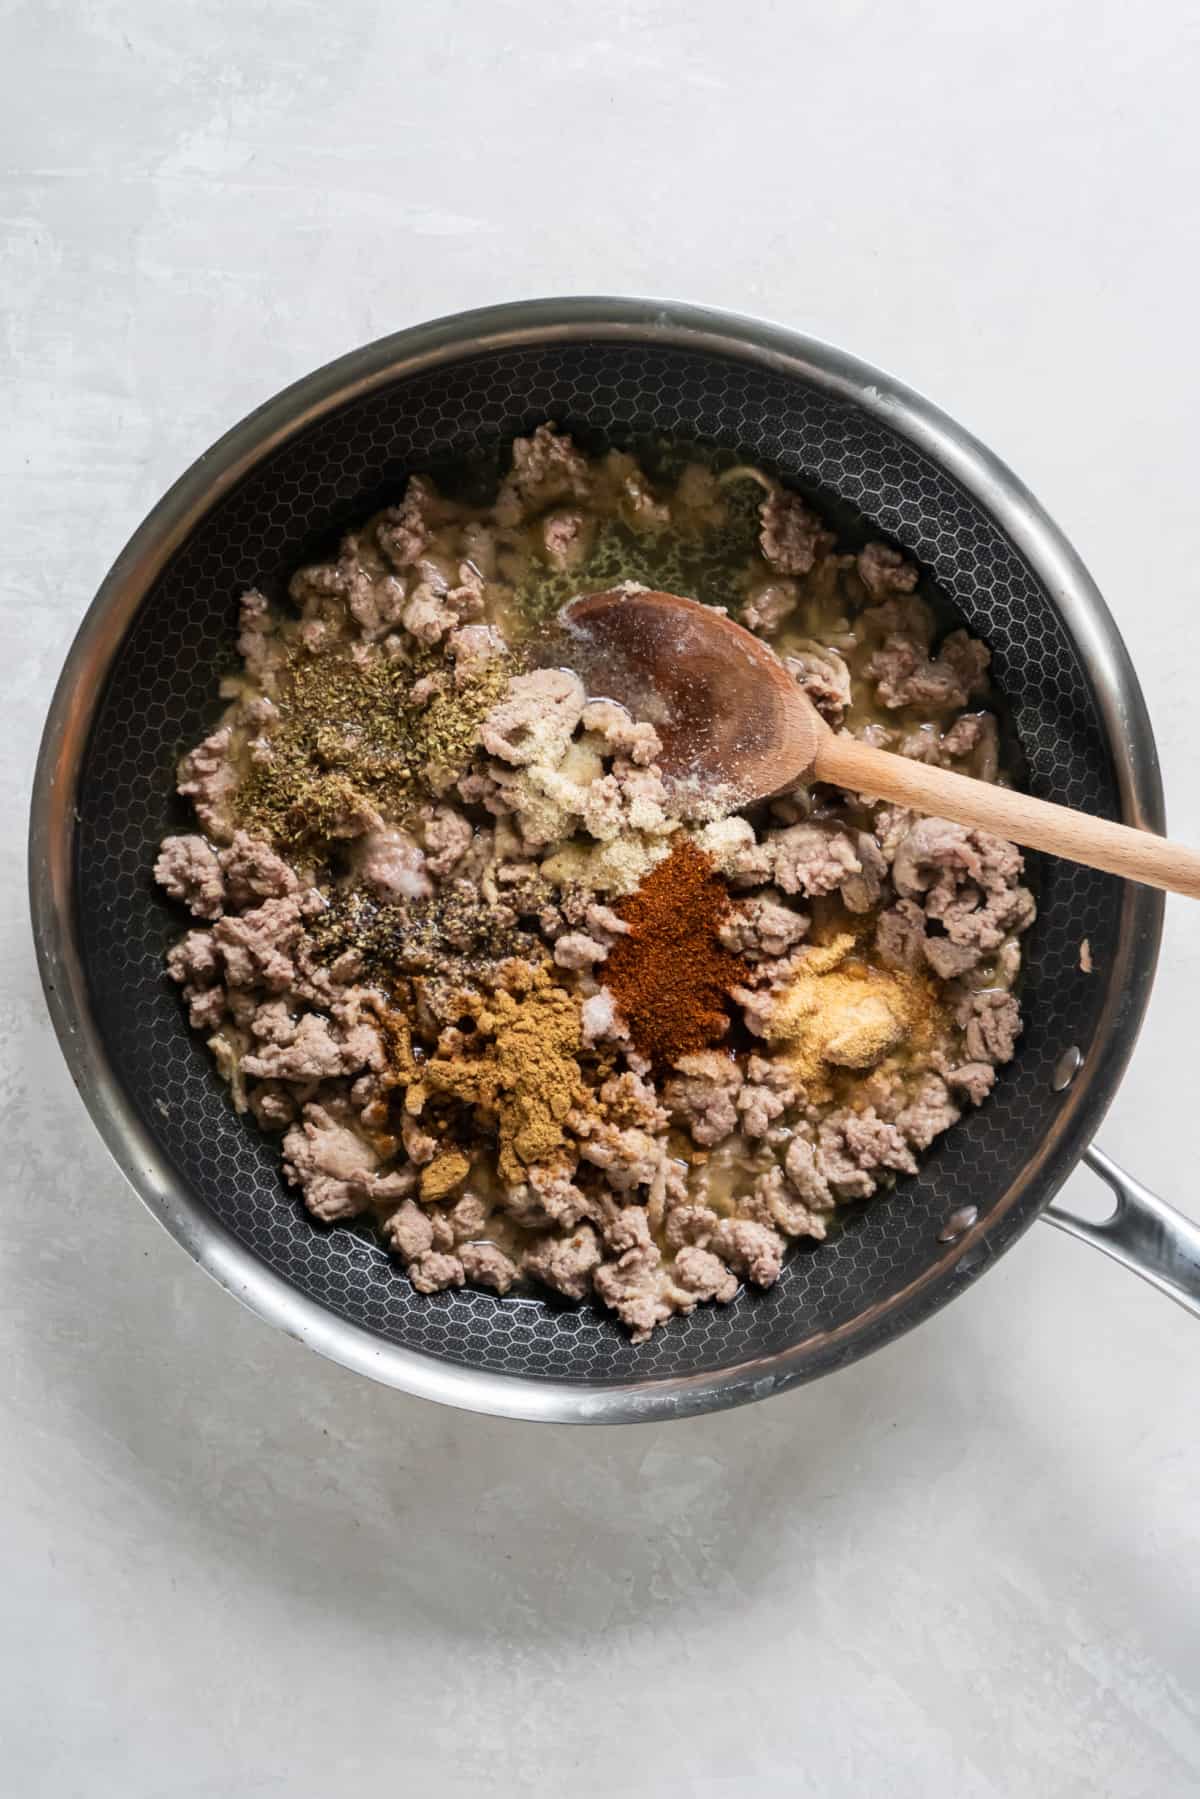 Cooked ground turkey in a pan with the seasonings sprinkled on top before mixing together.